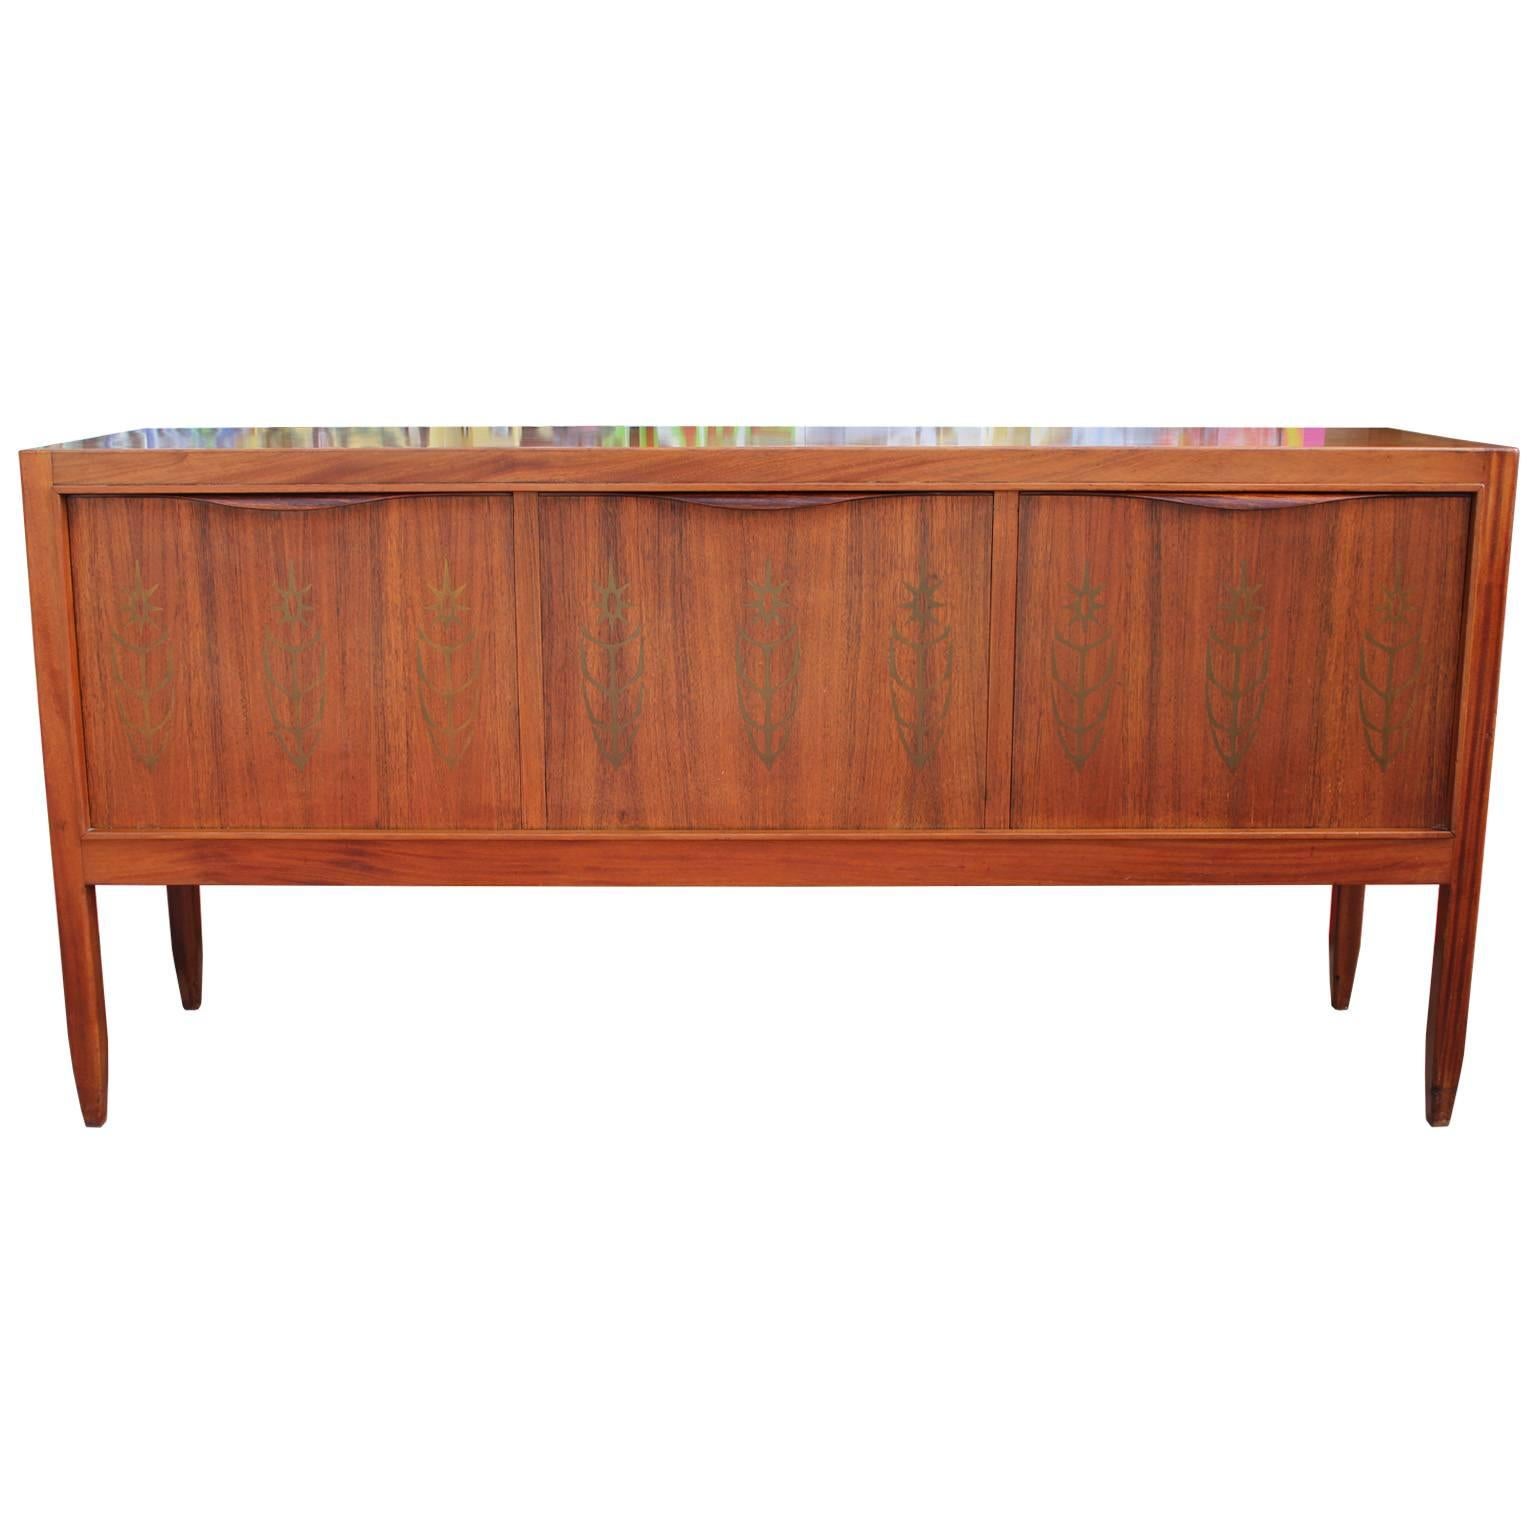 Modern Teak Sideboard or Cabinet with Brass Inlays and Flower Motif